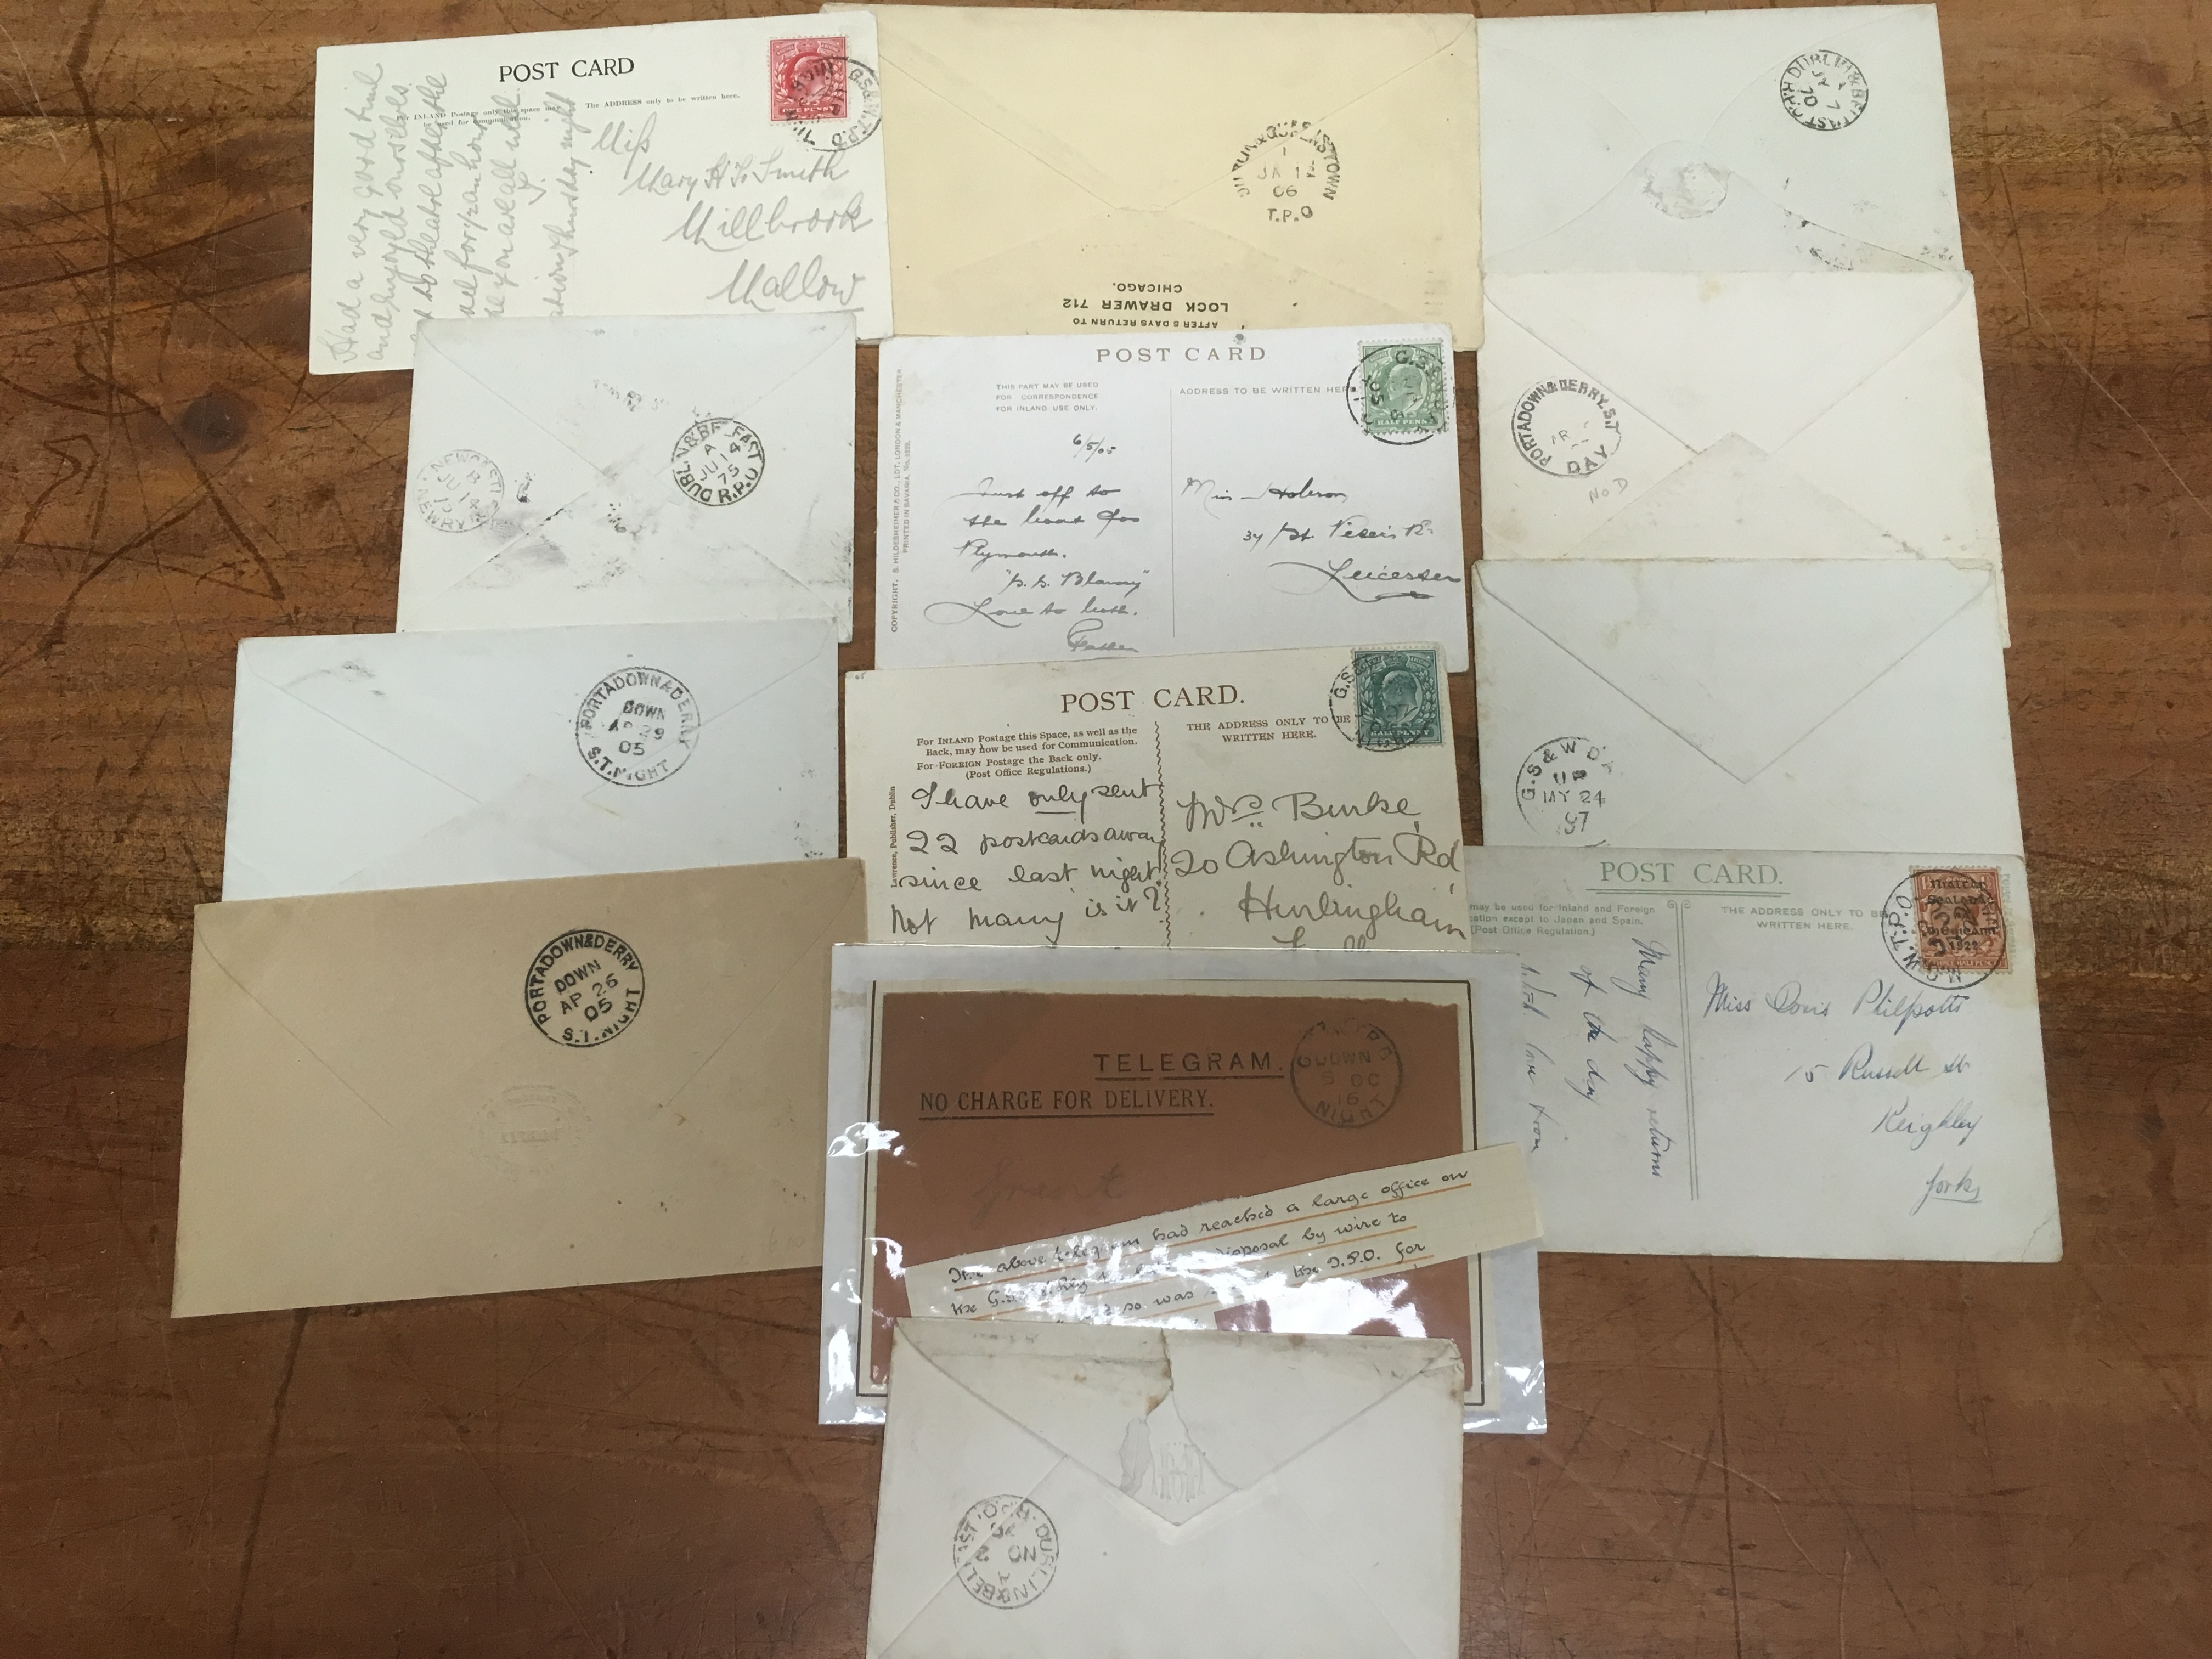 IRELAND: 1870-1937 COVERS AND CARDS WITH TPO POSTMARKS AND BACKSTAMPS, - Image 2 of 2